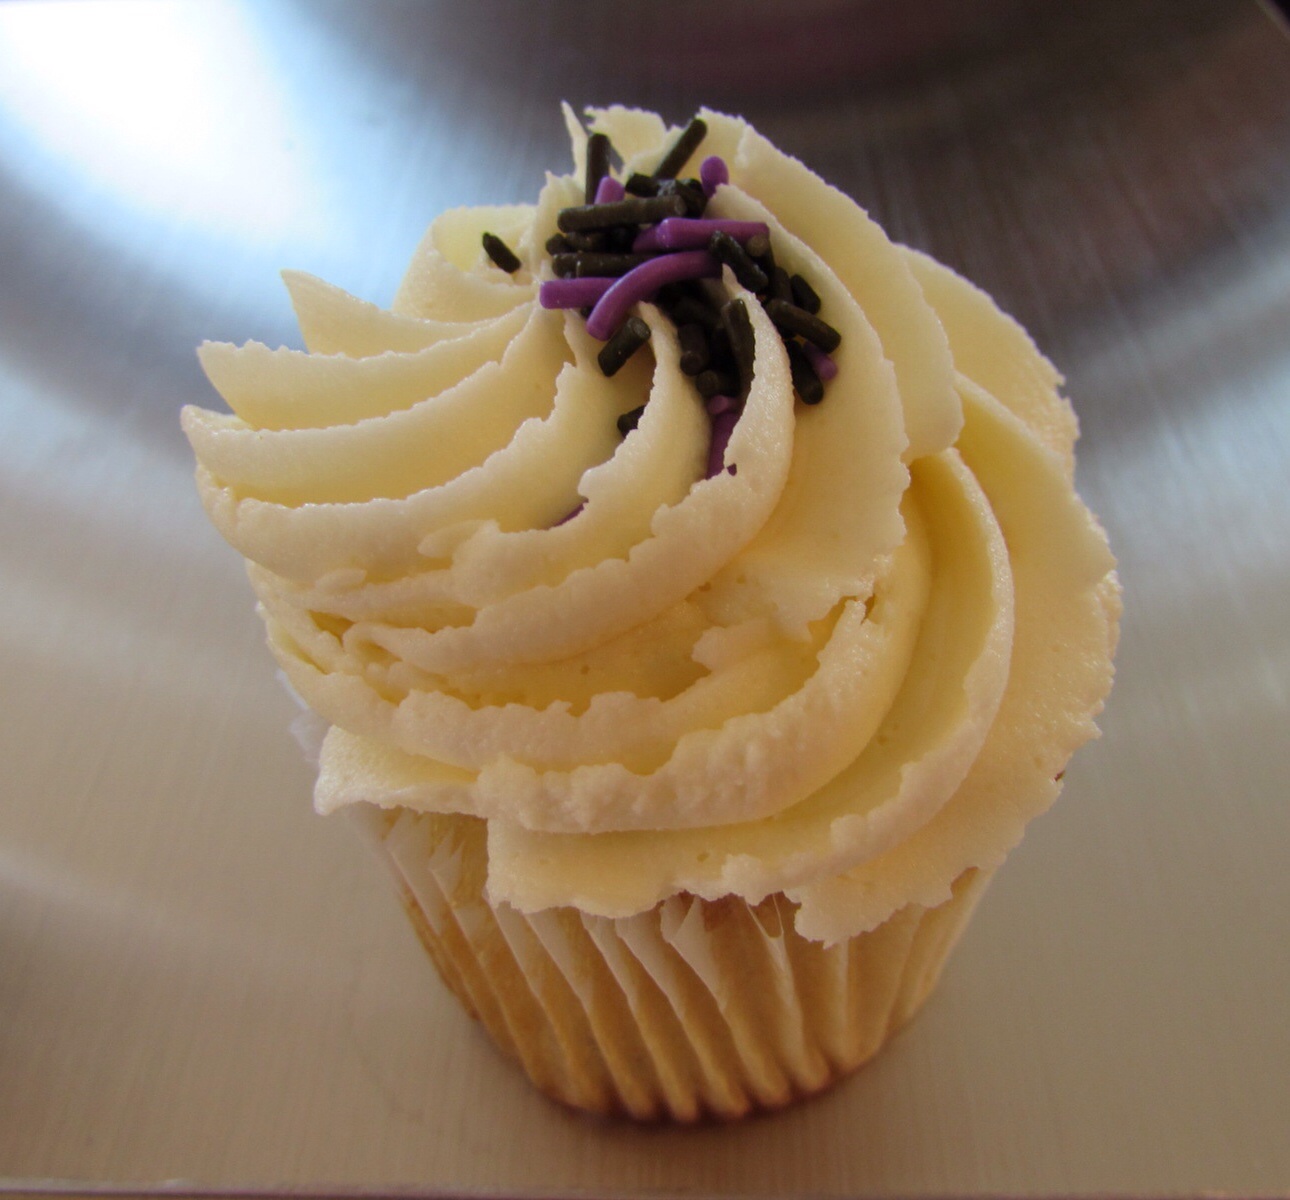 My tasty vanilla cupcake, which I finished in an embarrassing little amount of time!